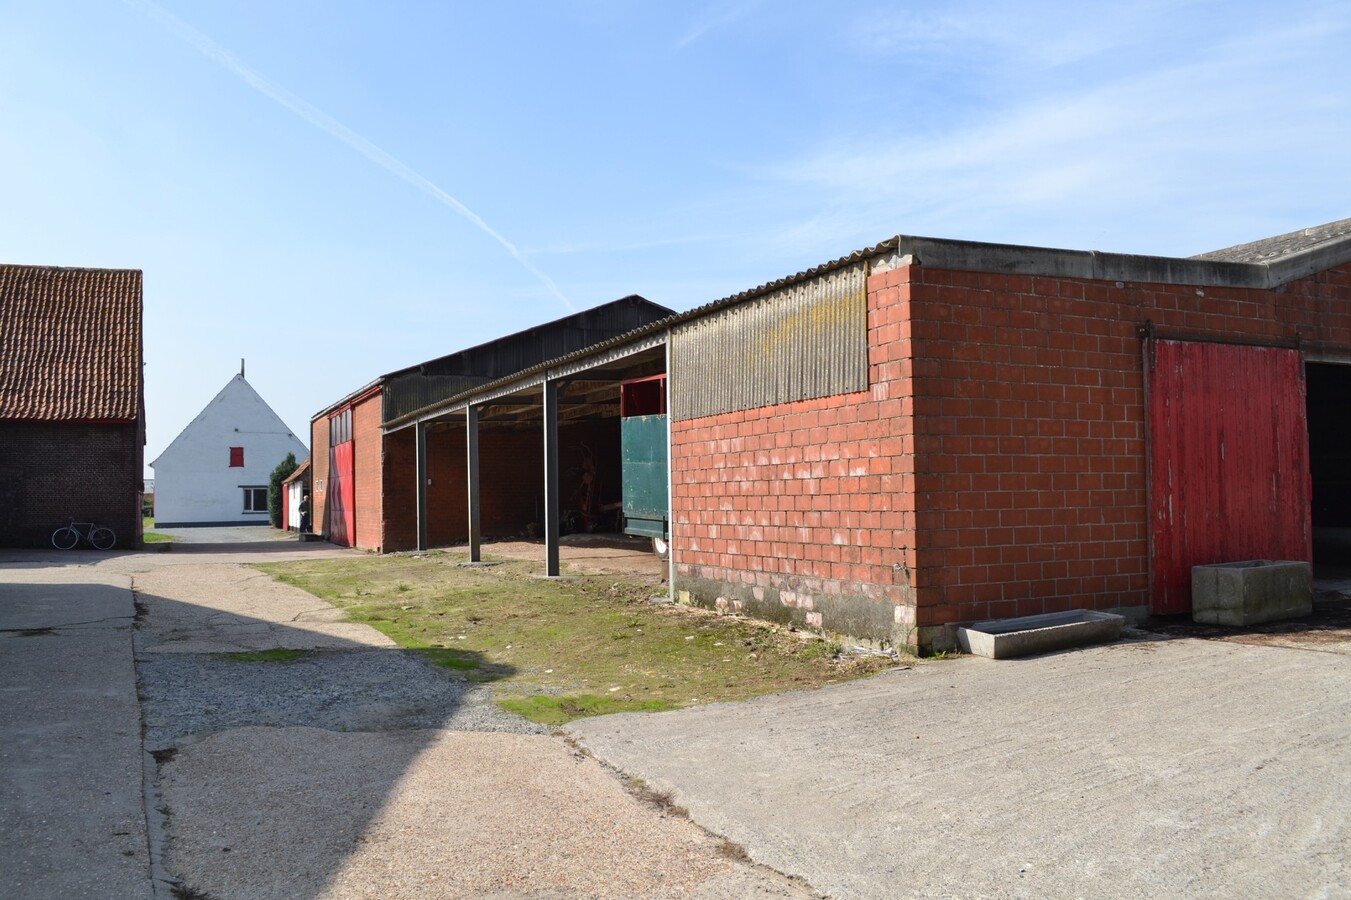 Property sold in Knesselare